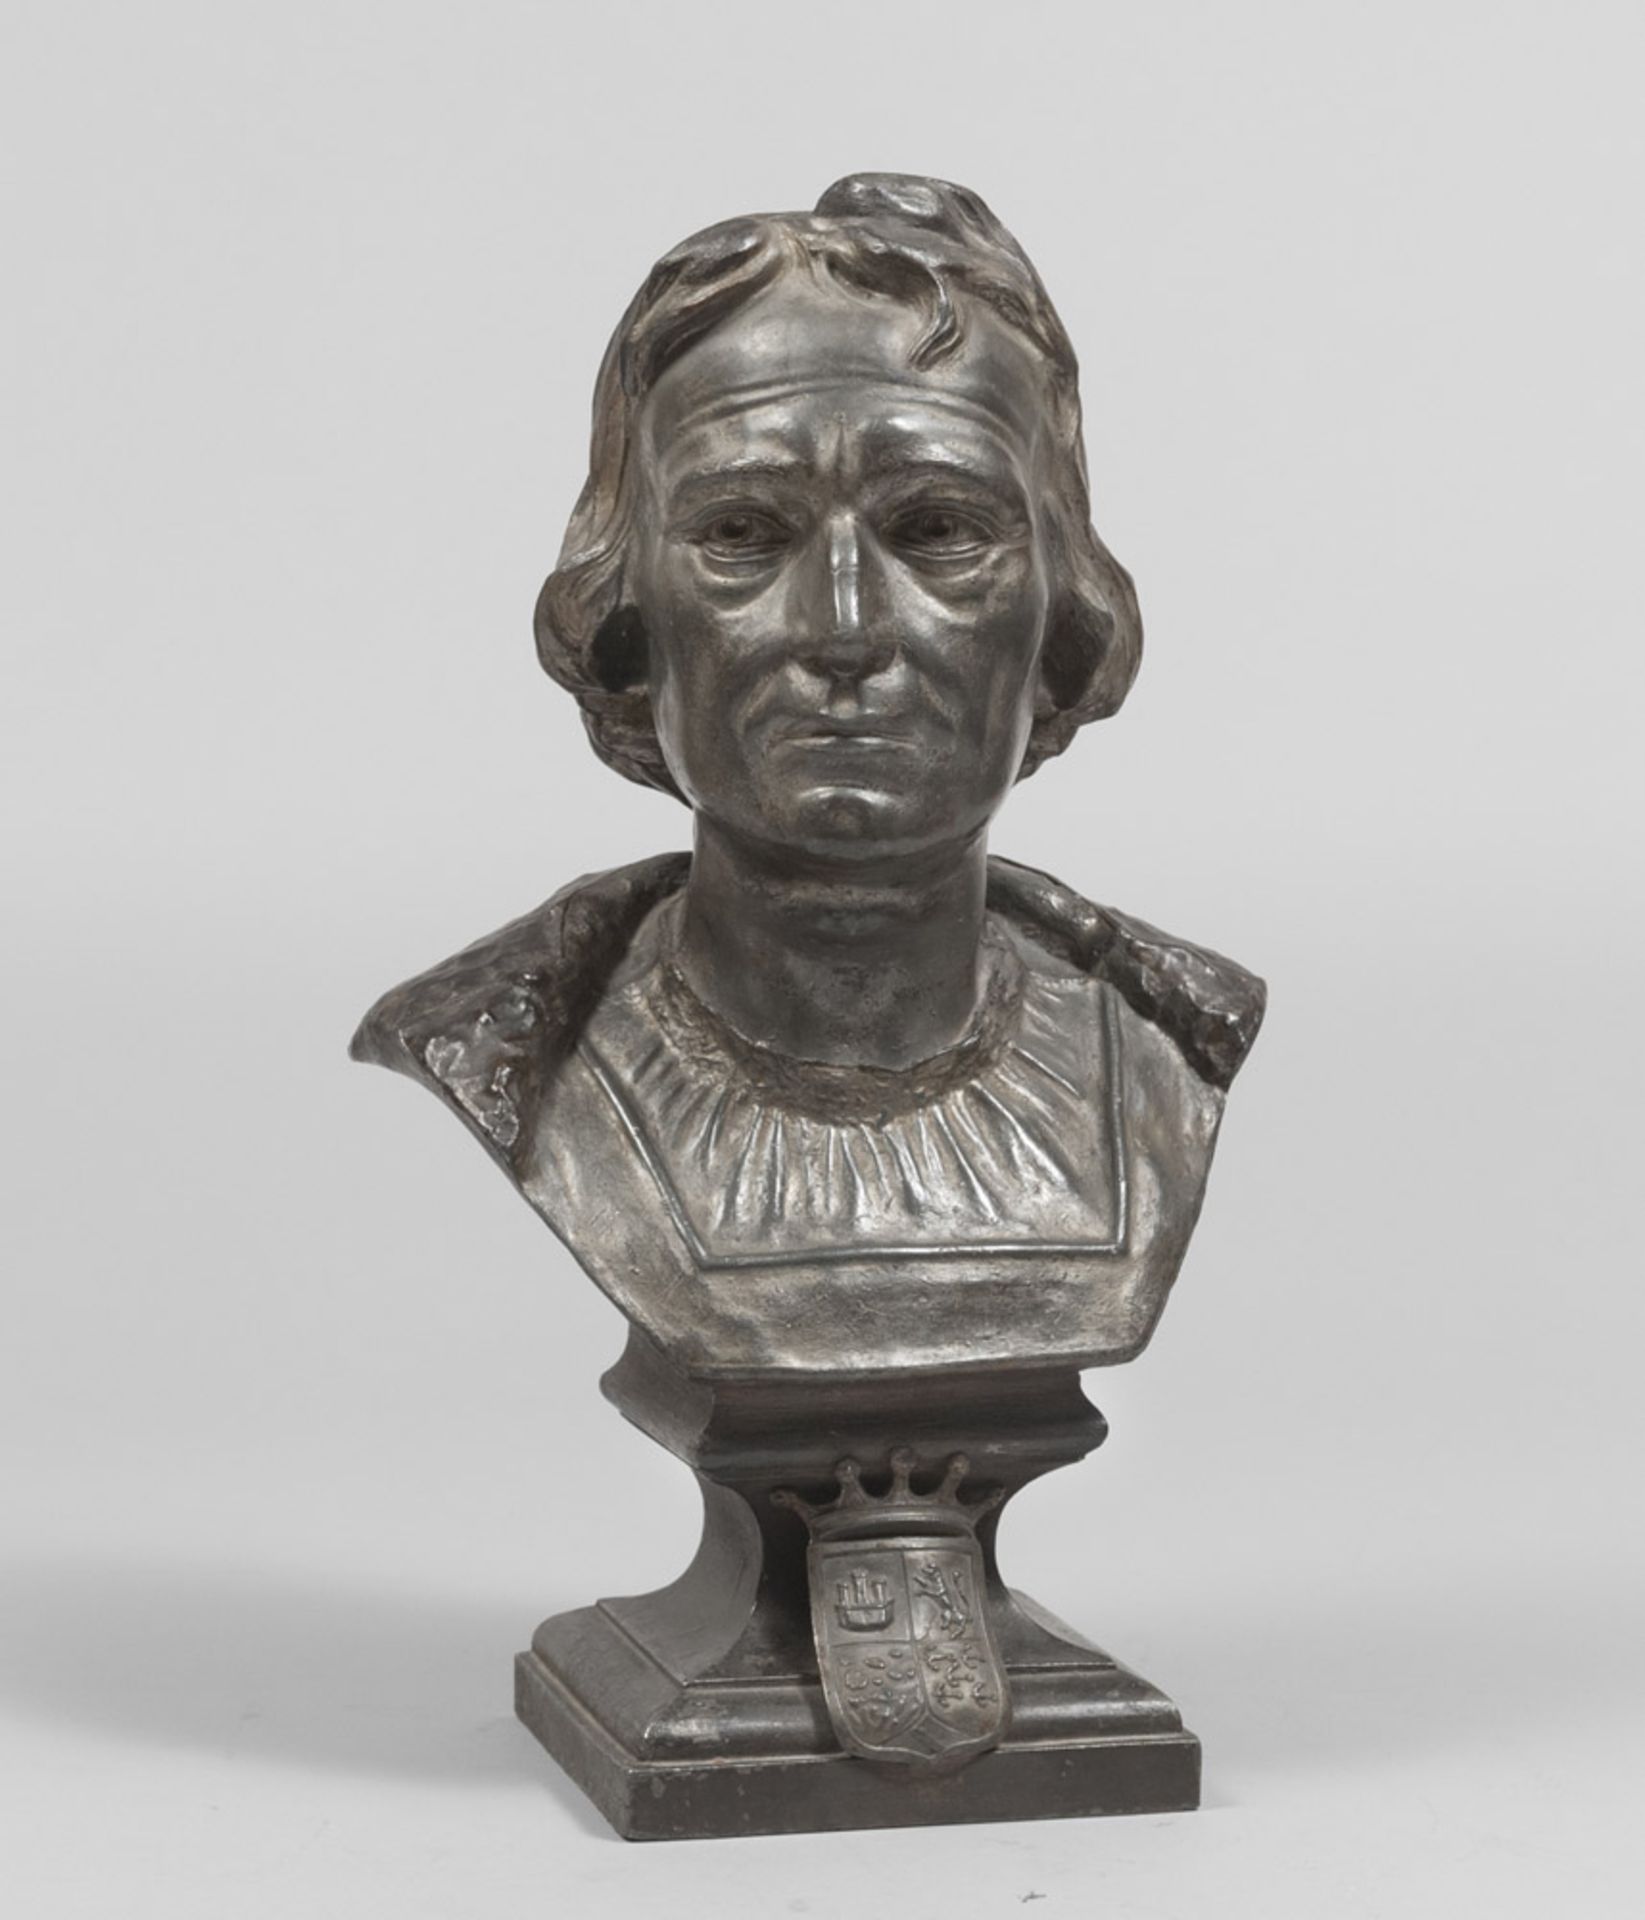 Genoese sculptor, late 19th century. Cristoforo Columbus. Burnished patina bronze bust, cm. 48 x